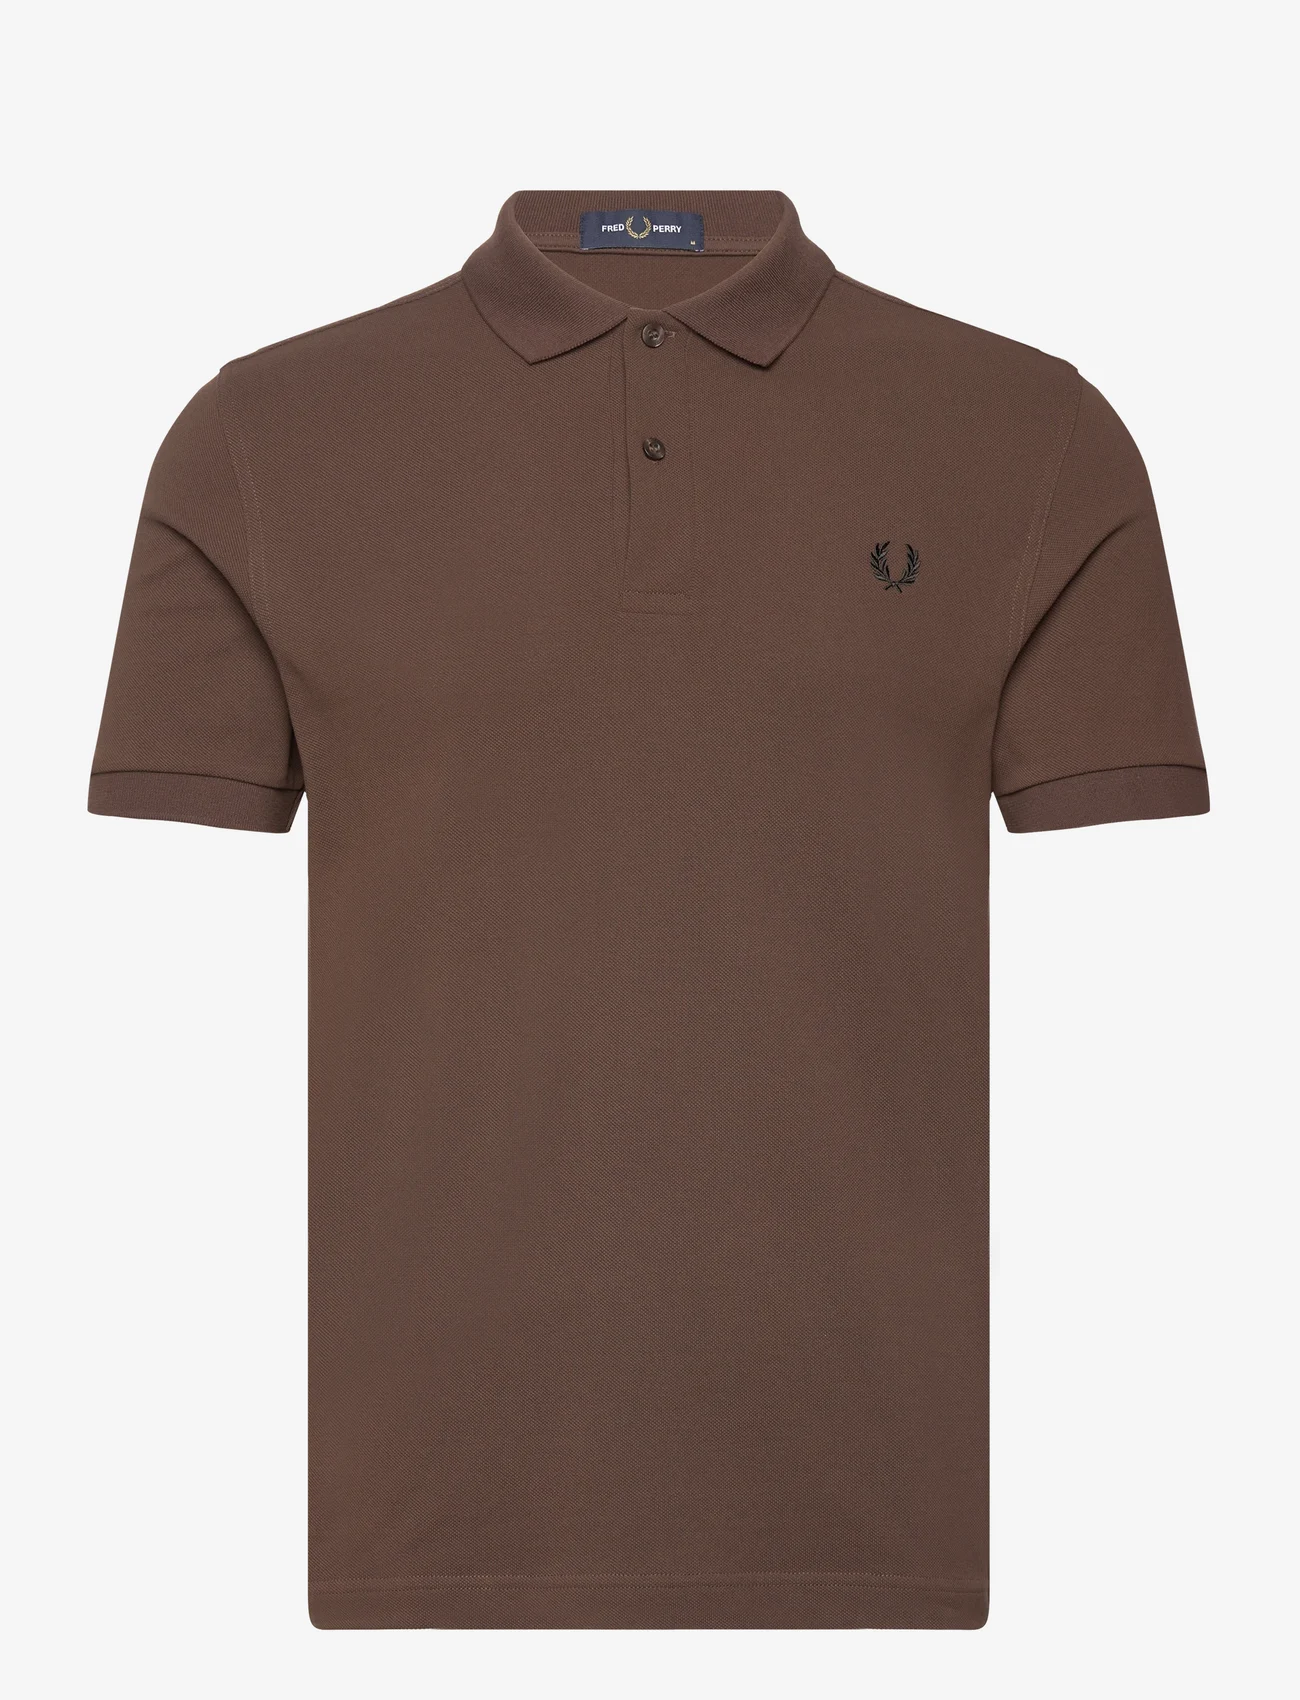 Fred Perry - THE FRED PERRY SHIRT - kortärmade pikéer - burnt tobacco - 0